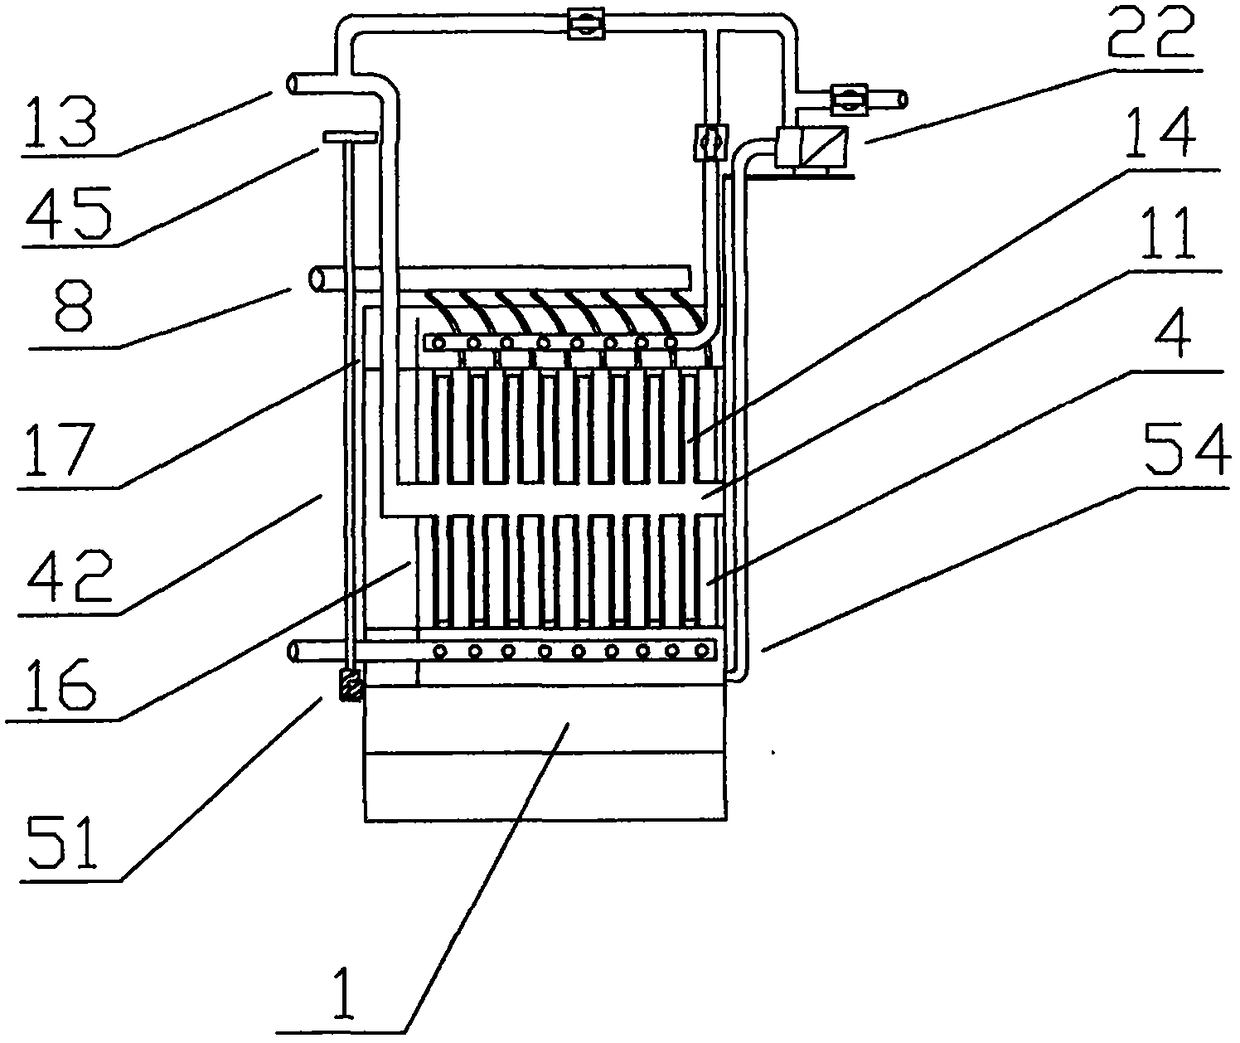 Jet self-cleaning type membrane assembly